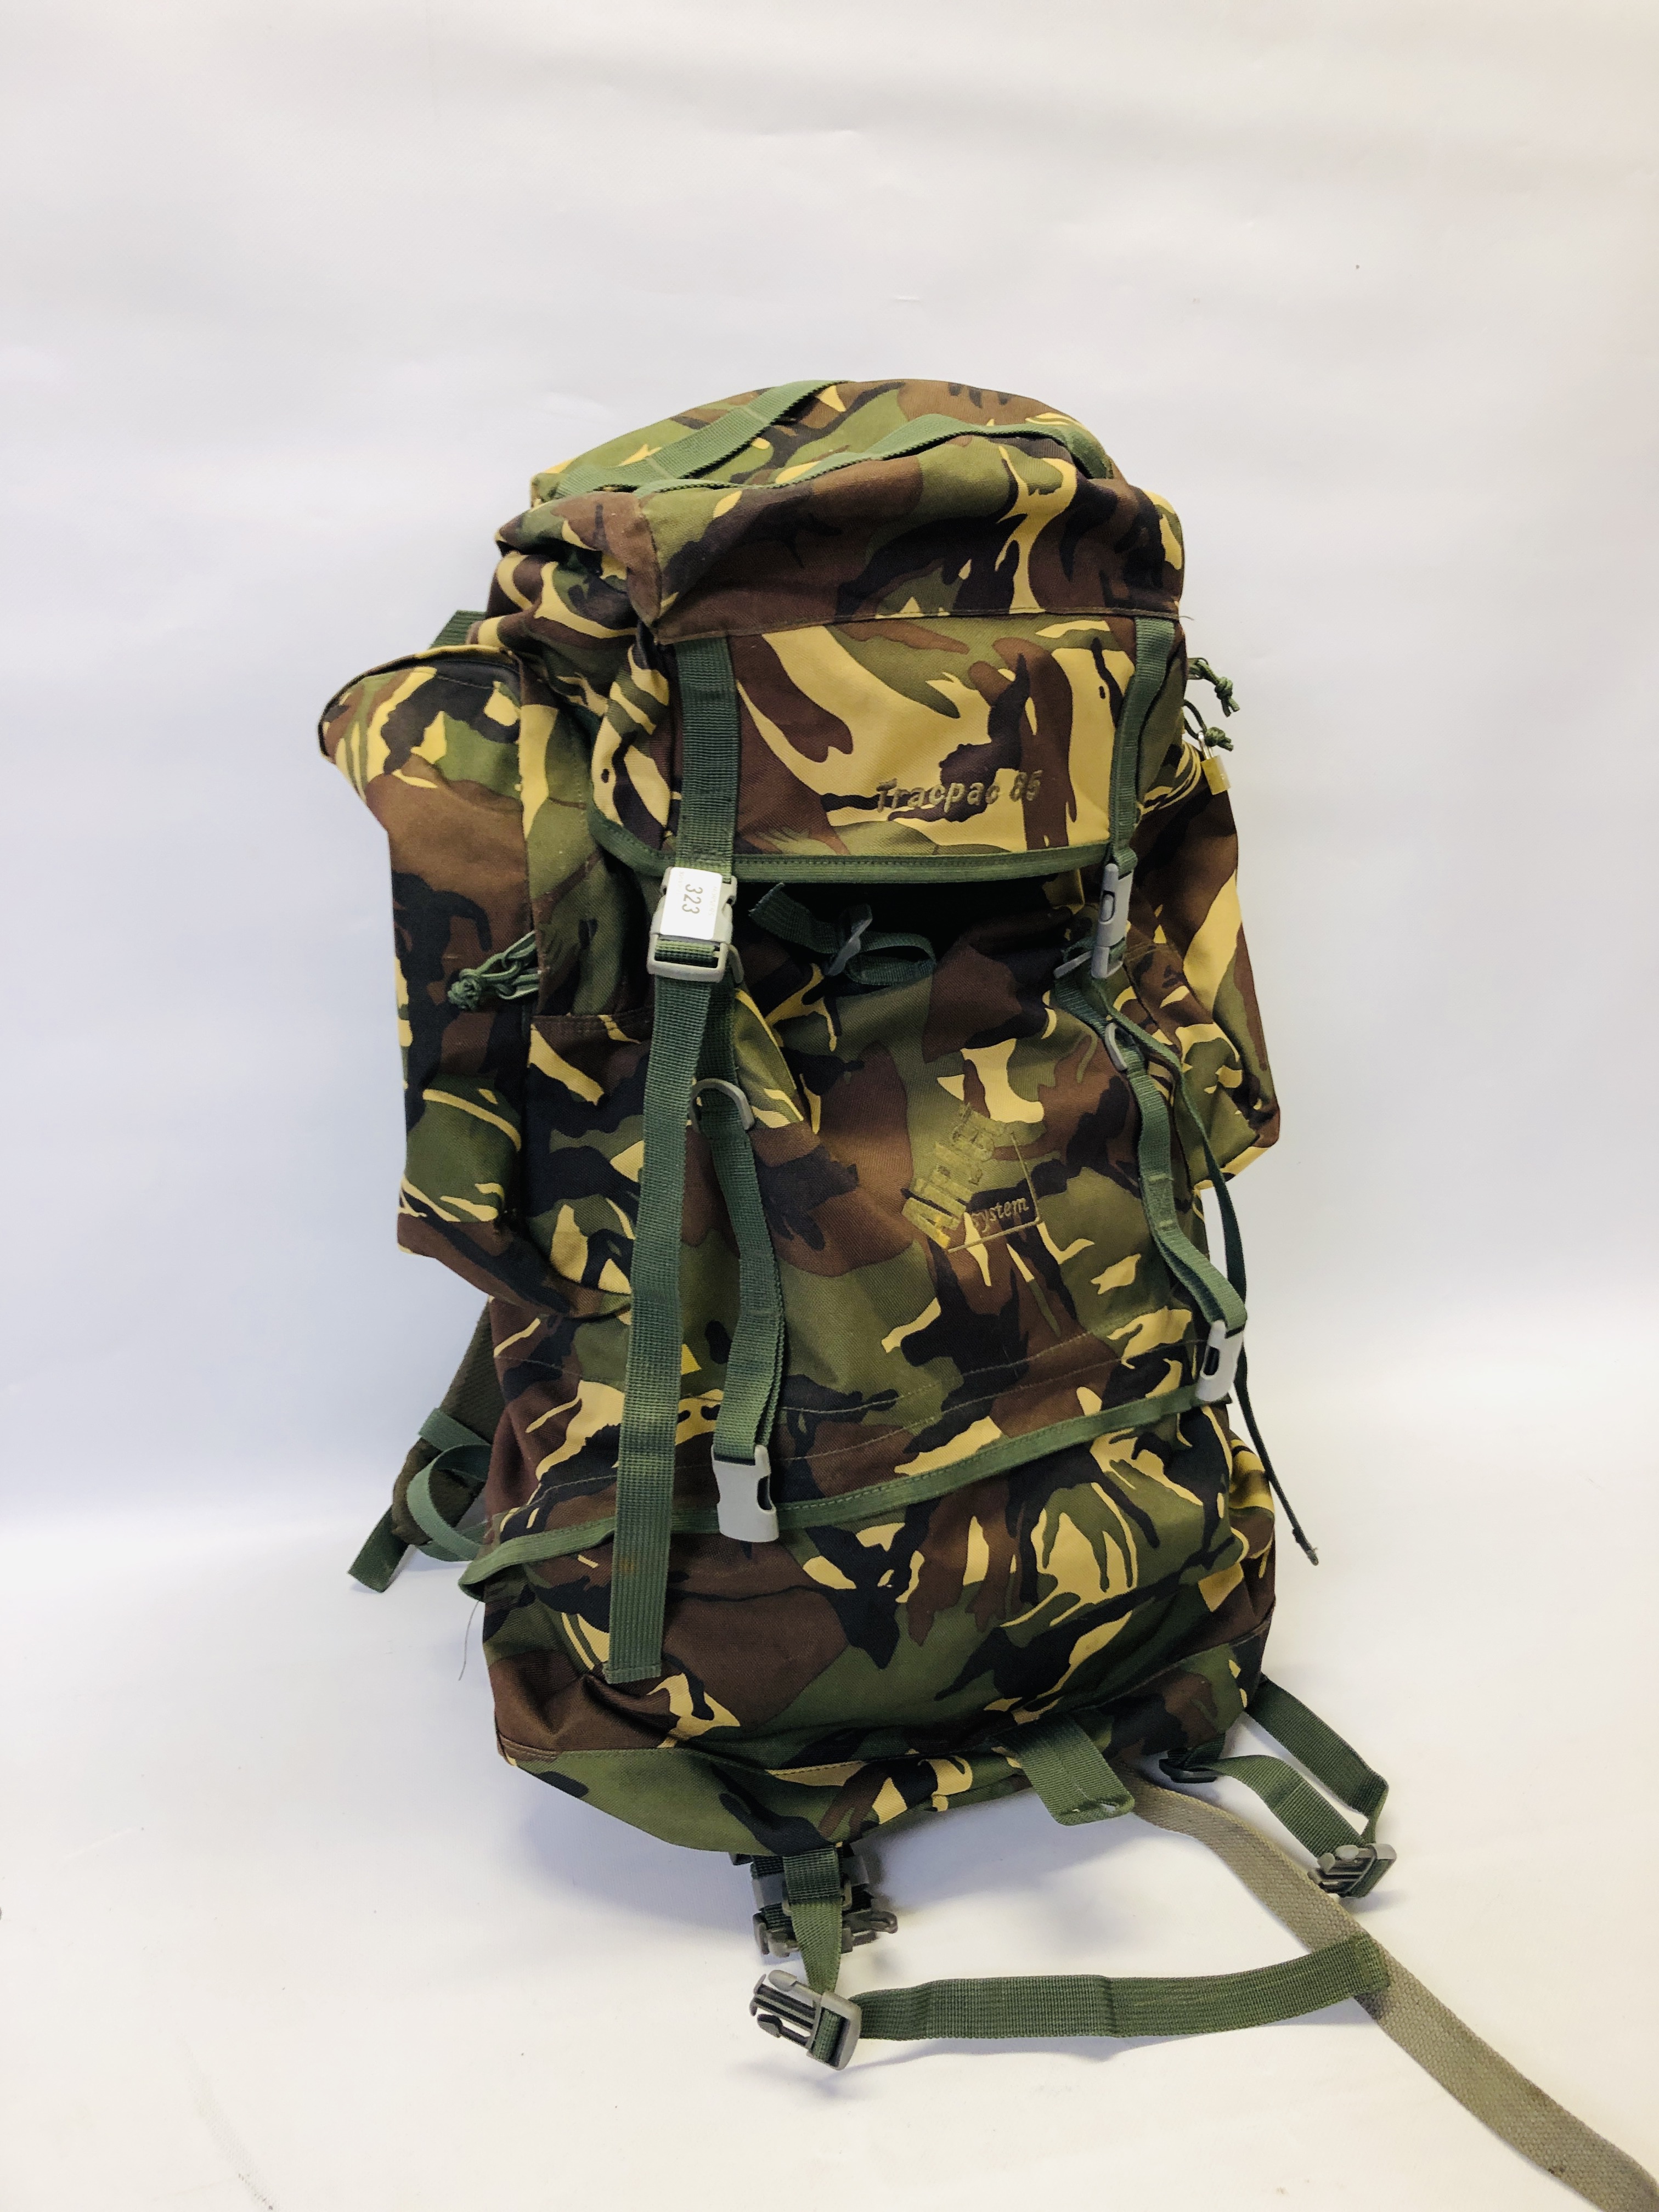 AIR JET SYSTEM TRACPAC 85 CAMO RUCKSACK & CONTENTS.